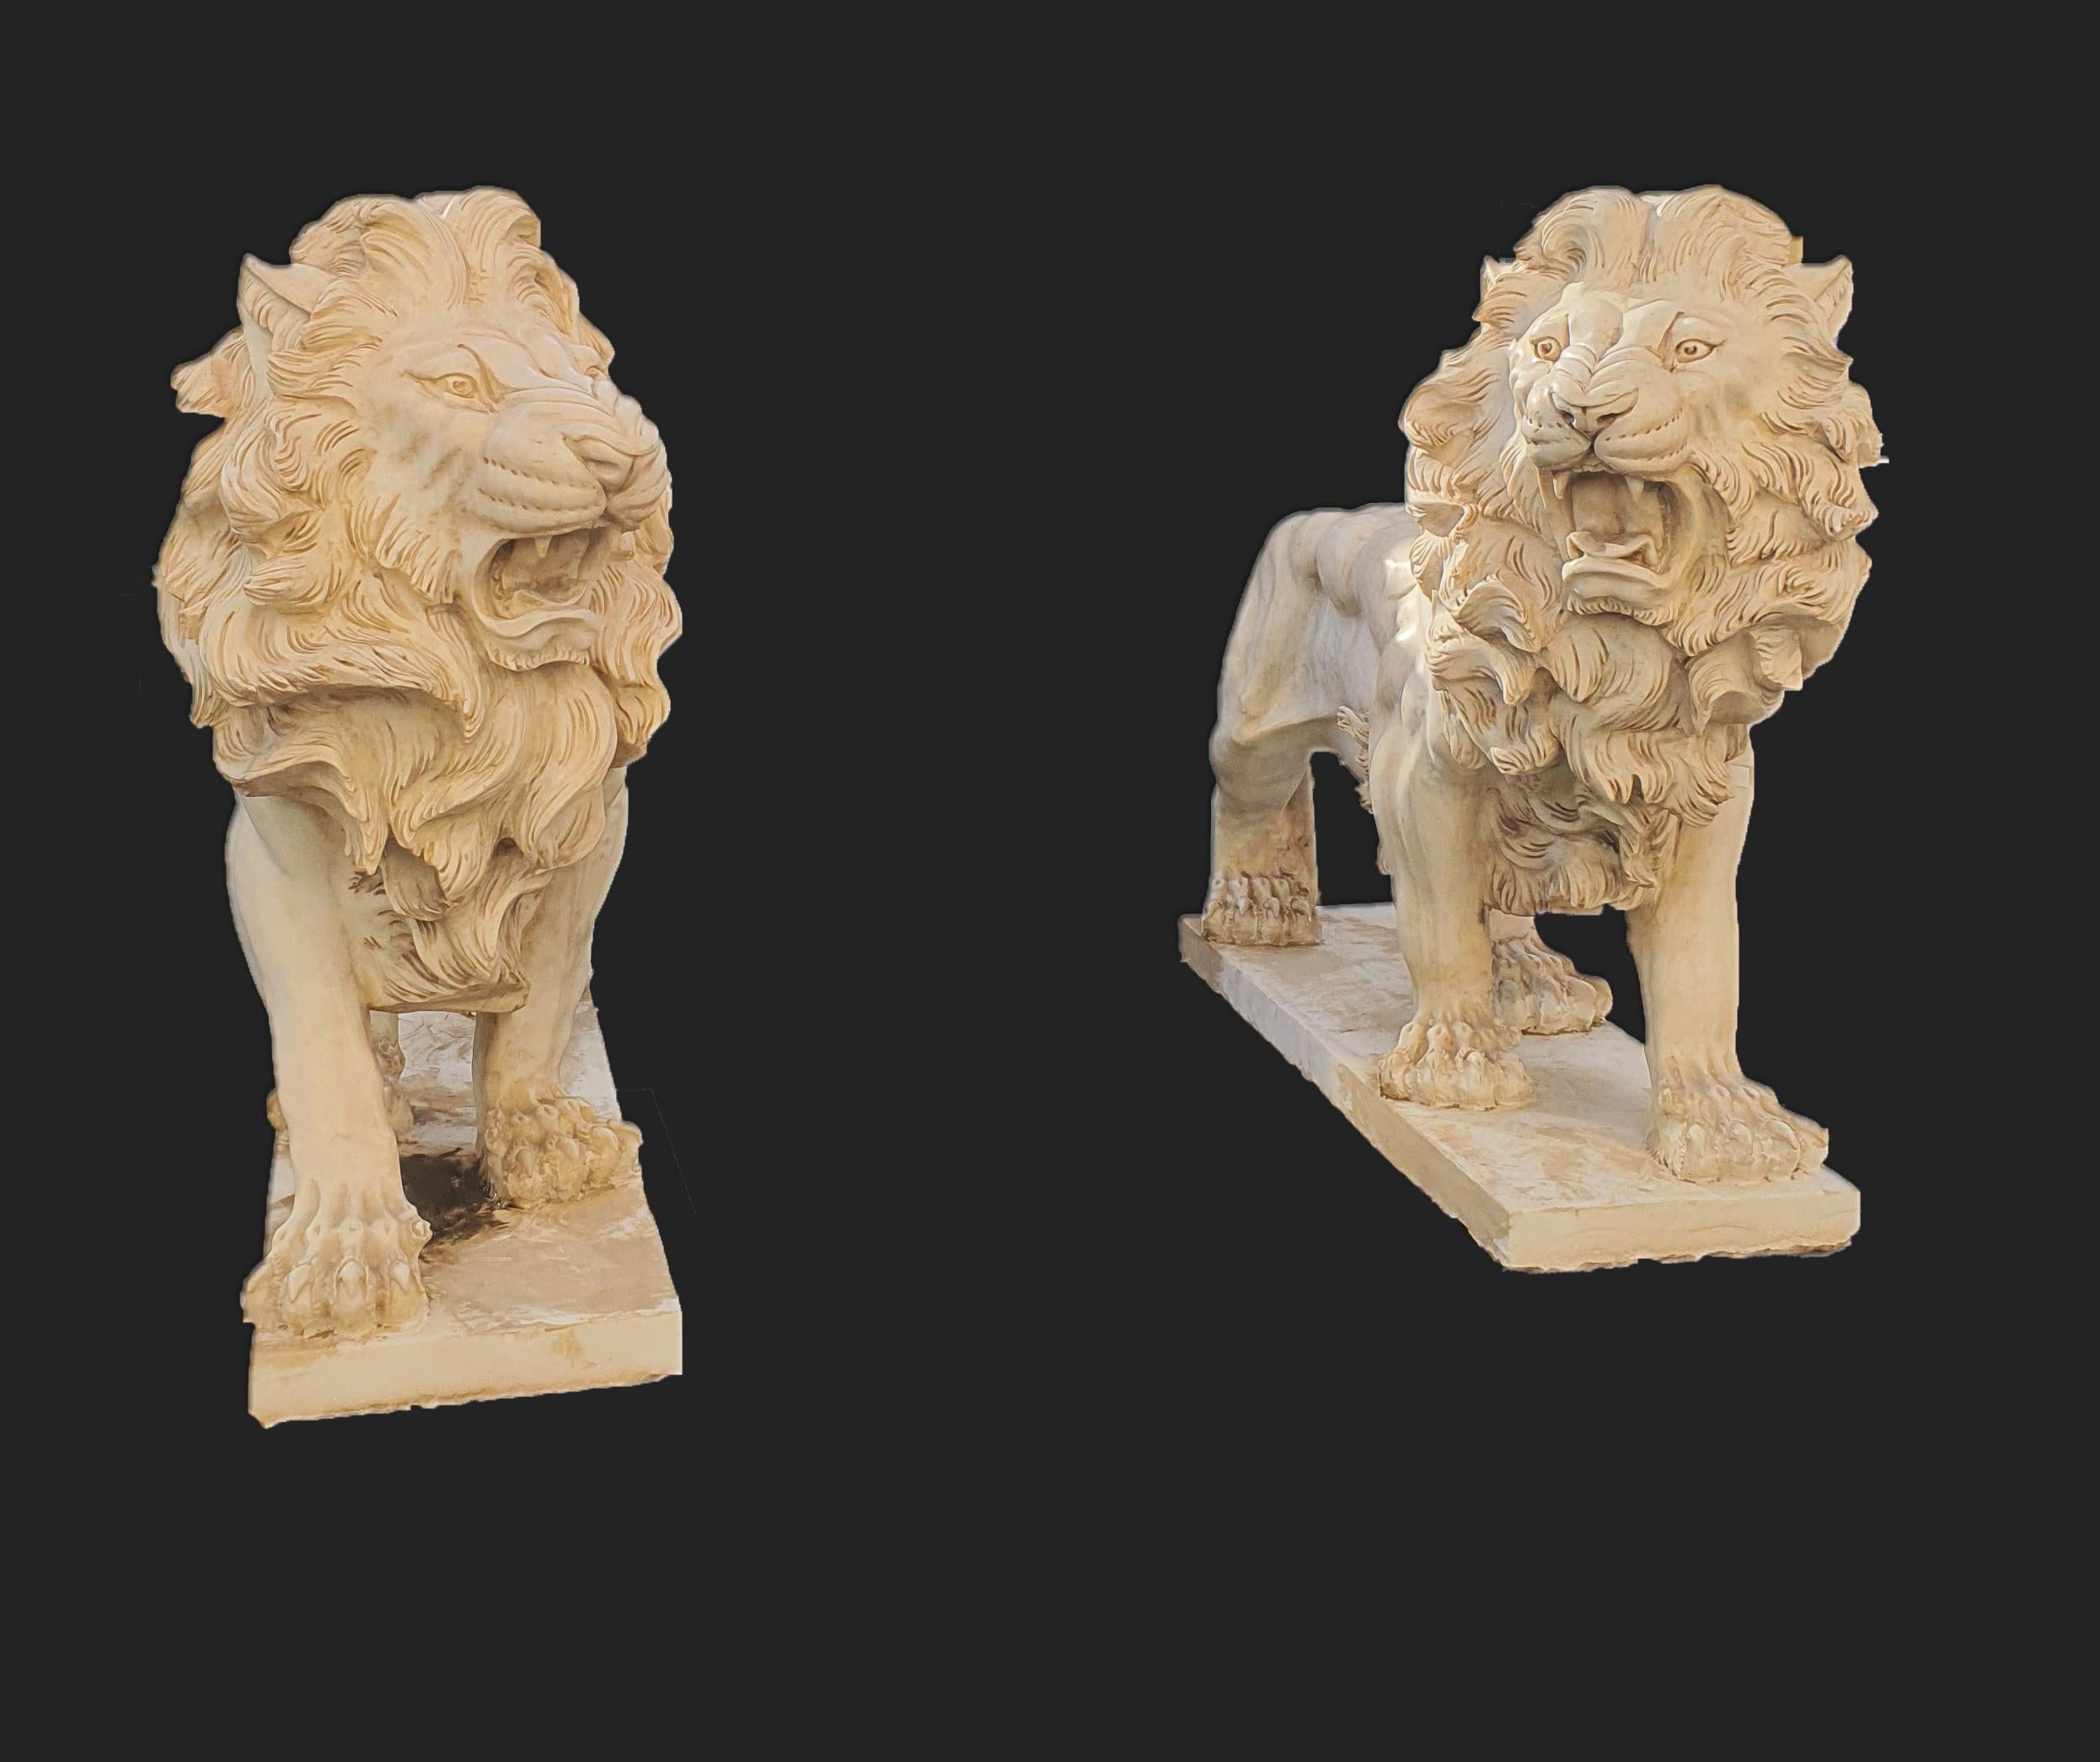 Elegant pair of statuary white marble sculptures depicting Lions. Finely carved sculpture in the smallest details.